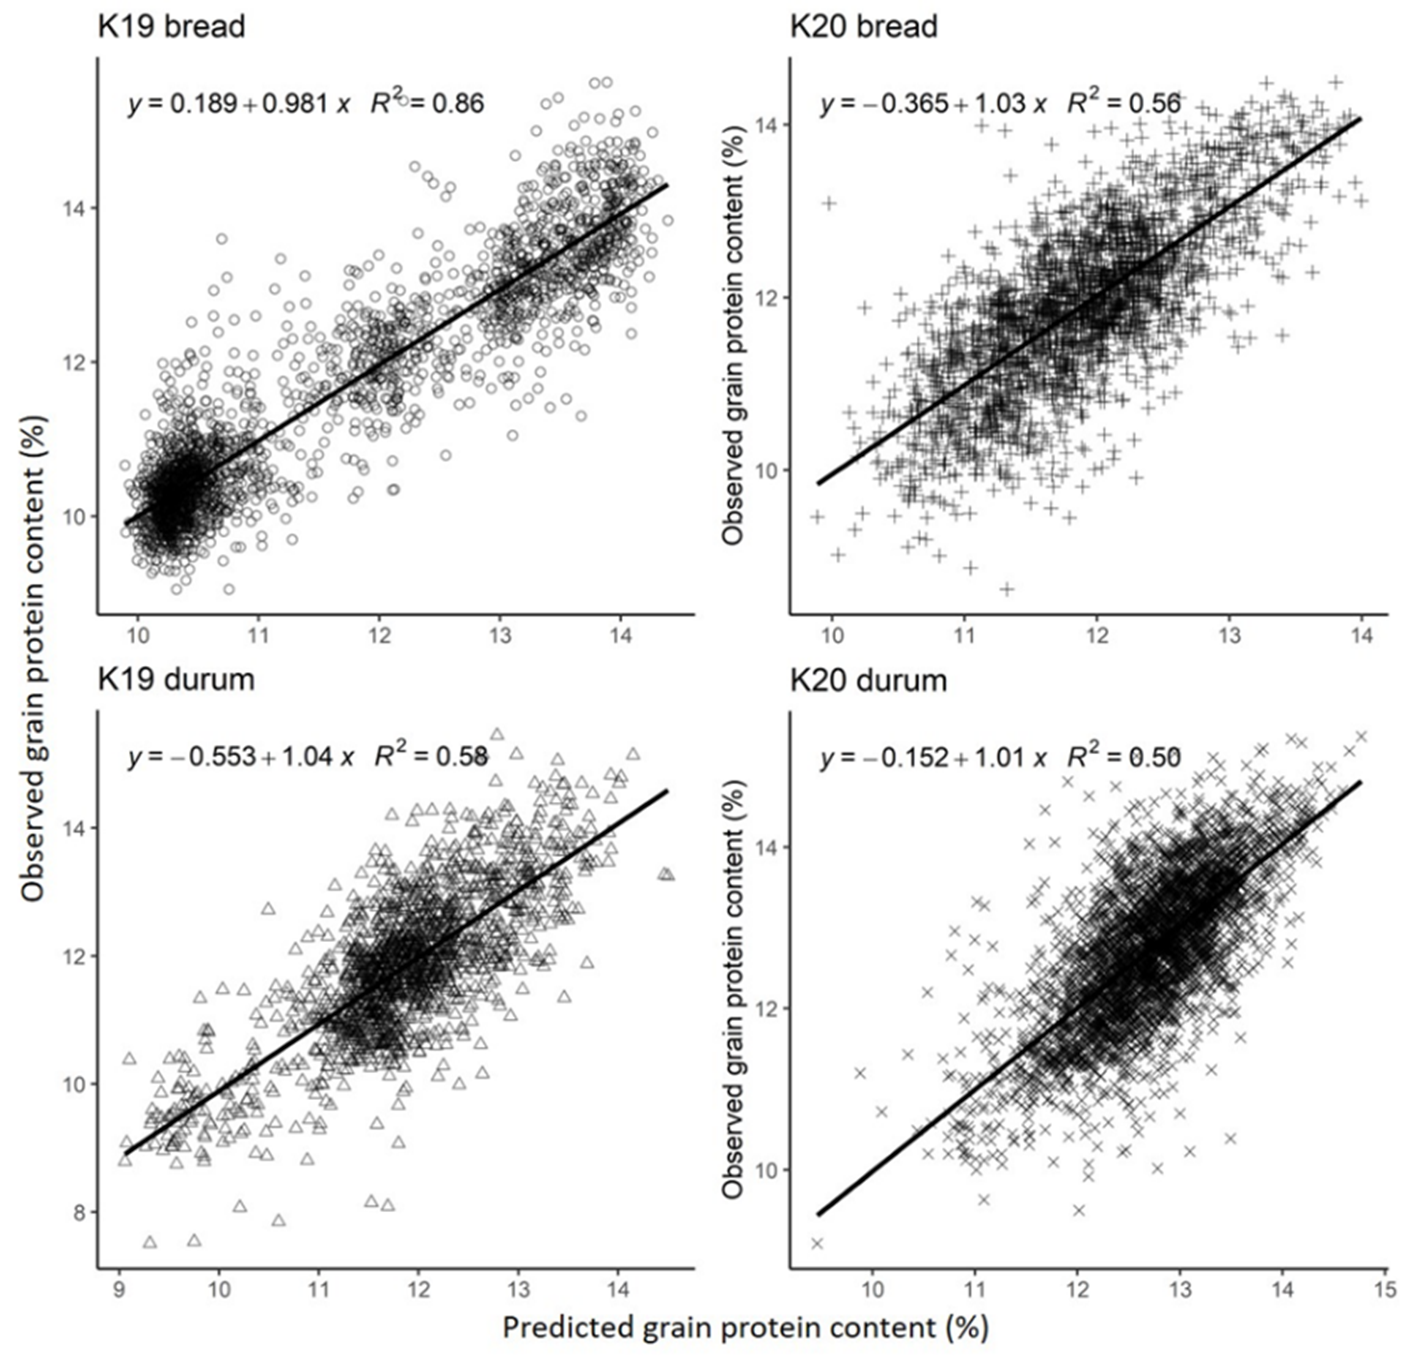 Observed grain protein content (GPC; %) as a function of predicted GPC in commercial bread and durum wheat crops at Kaniva, Victoria in 2019 and 2020. Discrepancies in R2 between figures and text arise because those in the text represent the mean of many model runs, while the figures are from random single runs within crop type and year.